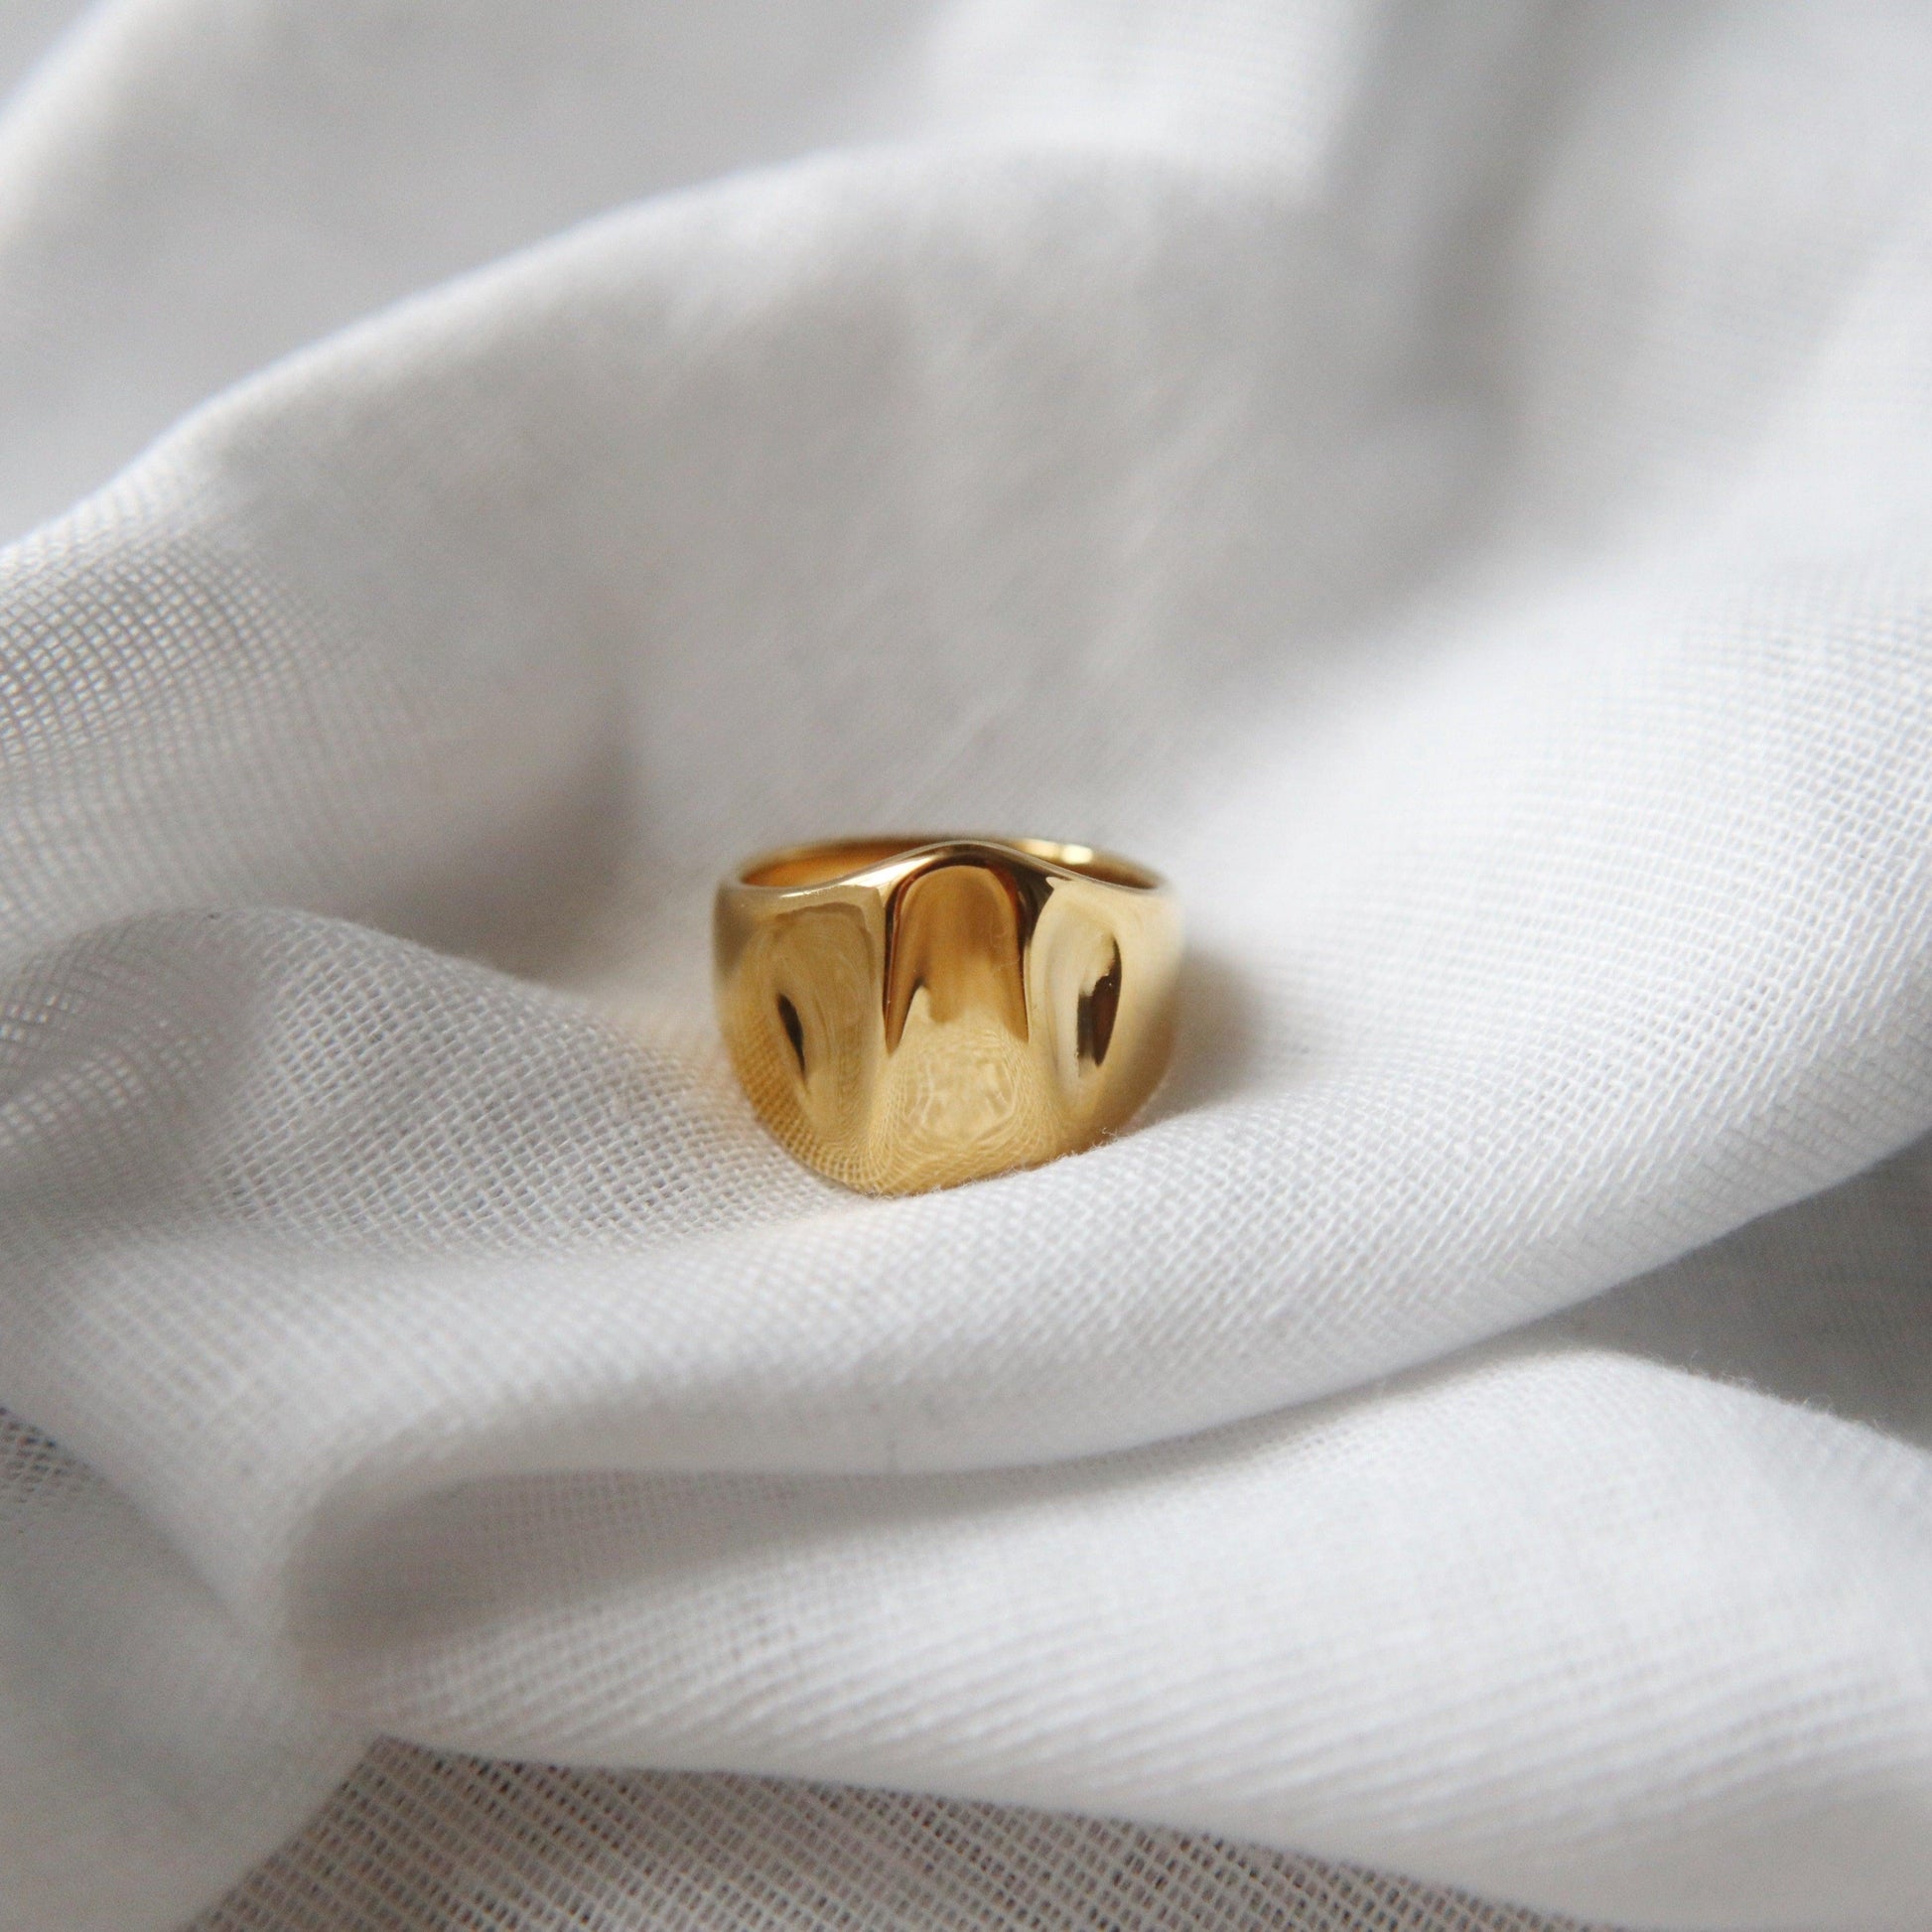 Kendall Ring | Bold Statement Ring - JESSA JEWELRY | GOLD JEWELRY; dainty, affordable gold everyday jewelry. Tarnish free, water-resistant, hypoallergenic. Jewelry for everyday wear